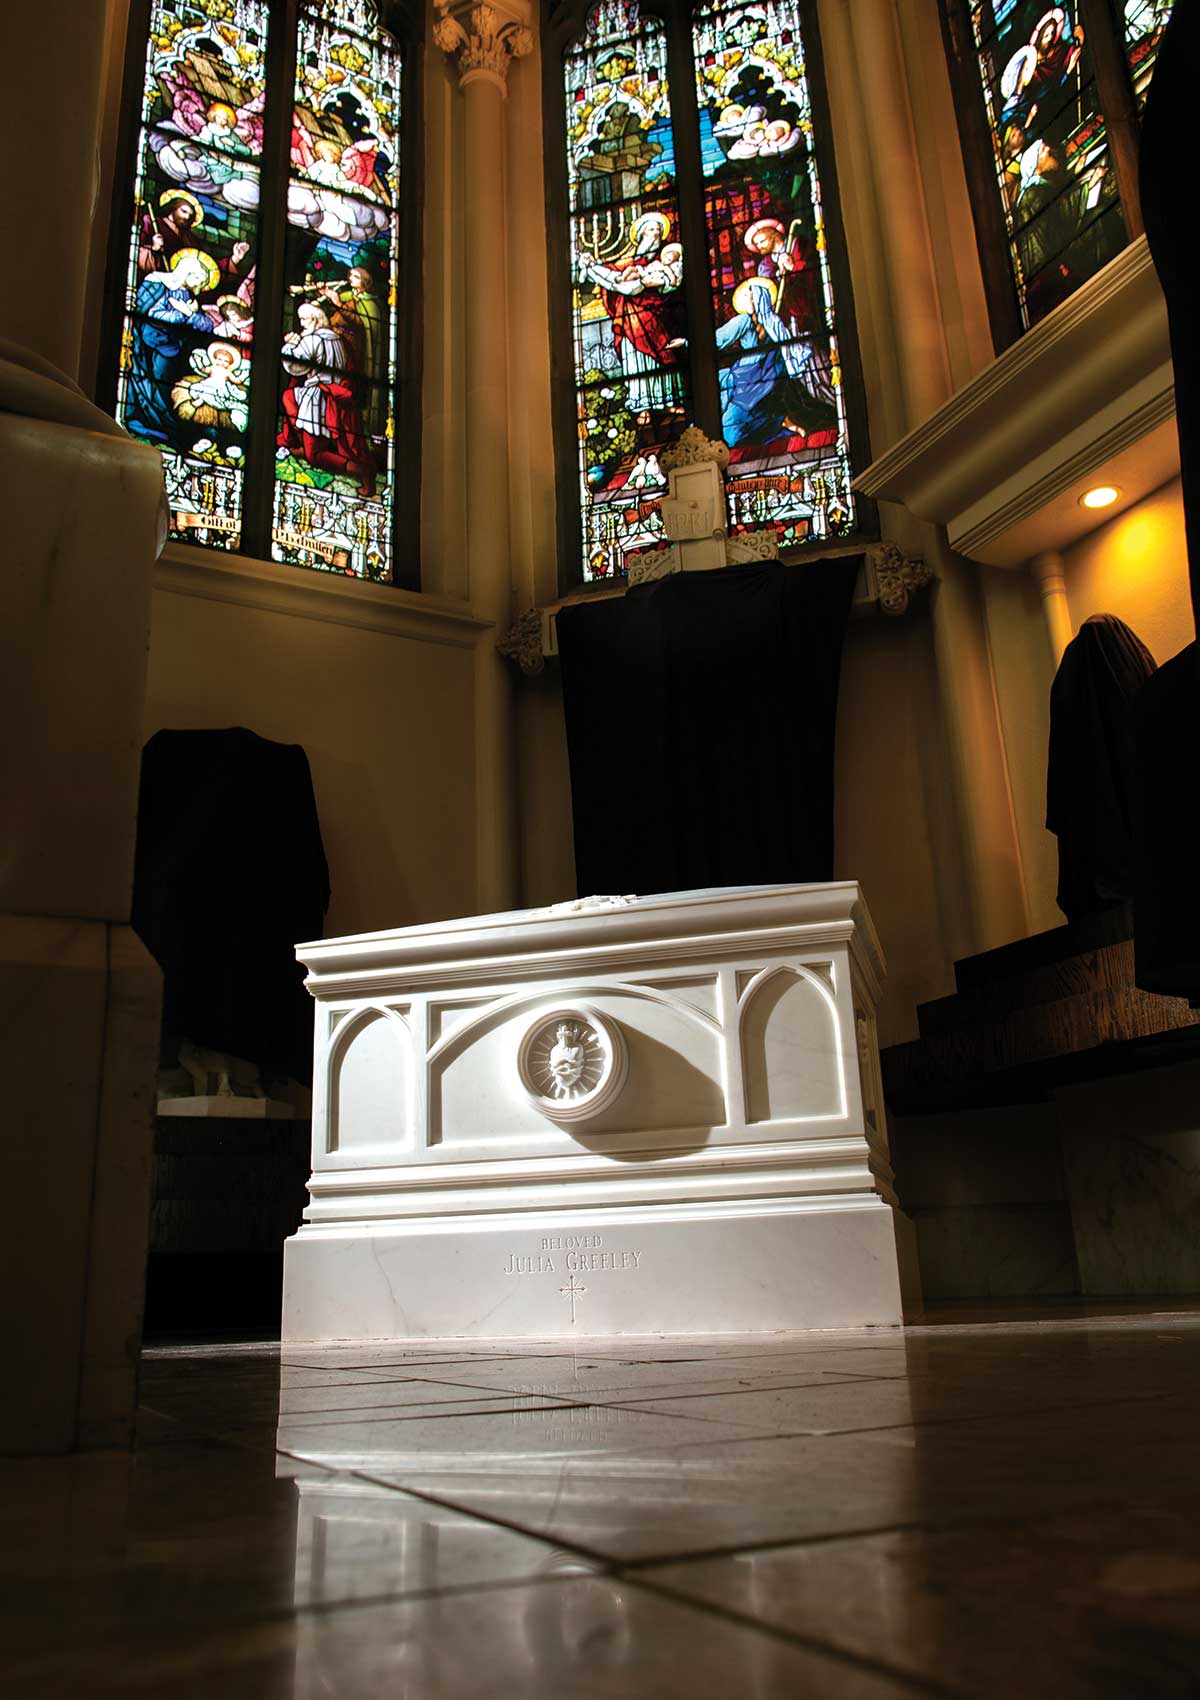 The marble coffin containing Greeley’s sits in the Cathedral Basilica of the Immaculate Conception surrounded by stained glass windows and draped statuary.